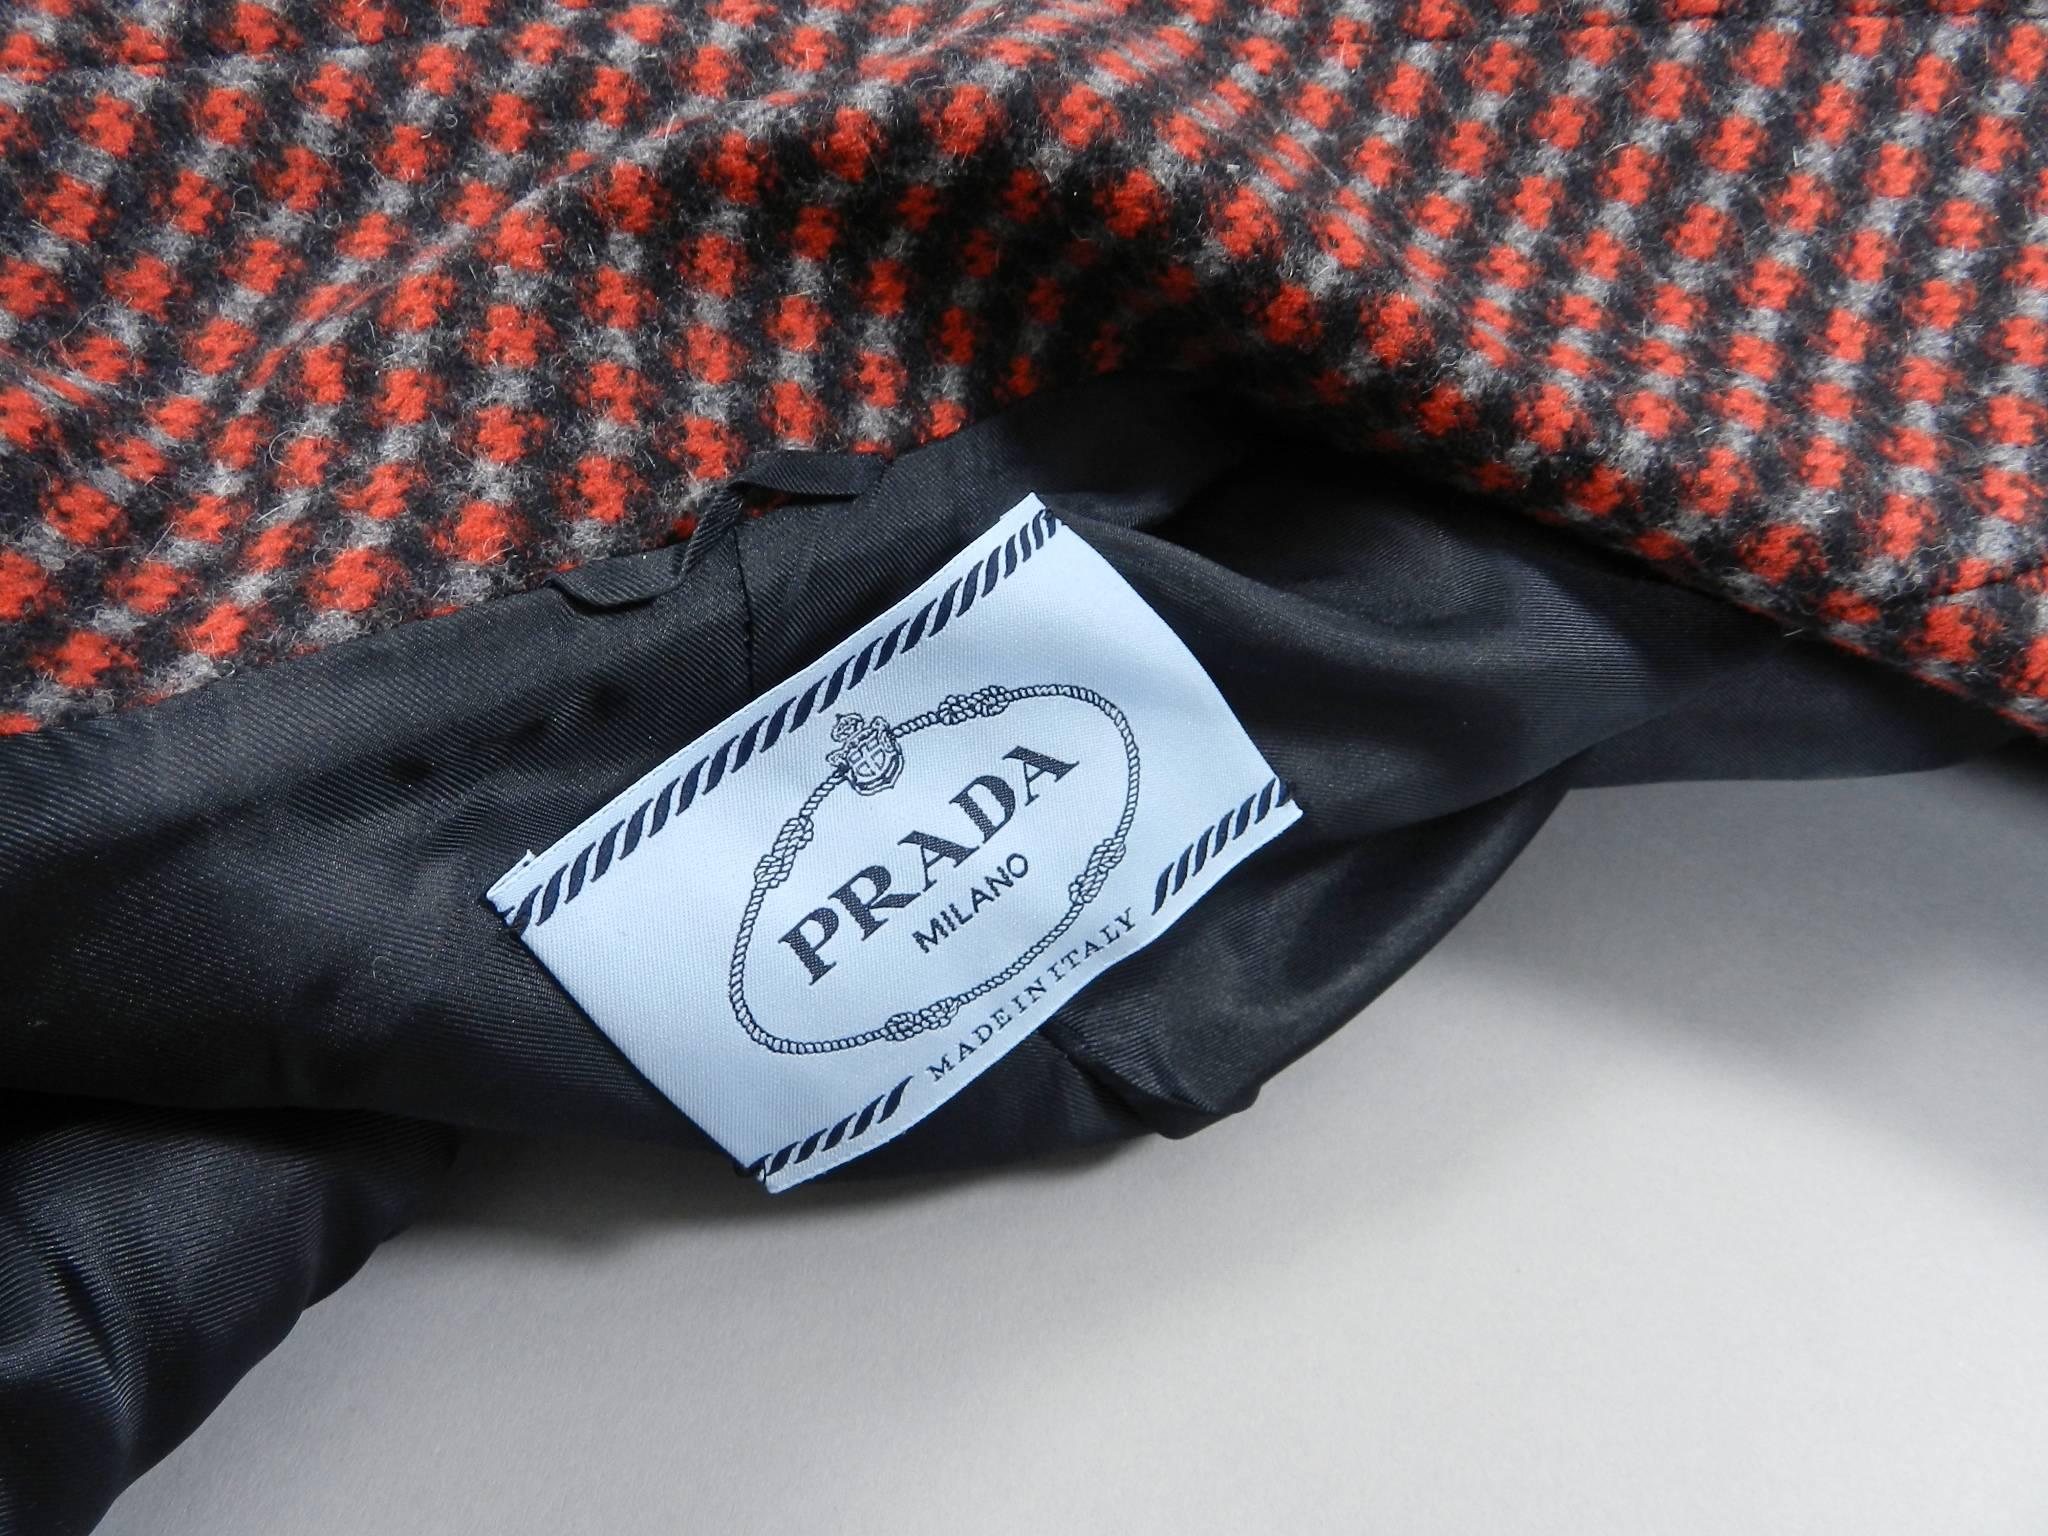 Prada fall 2014 red, grey, black wool blazer jacket. Fastens with one button at front waist, has front pockets, and 1970's inspired design. Excellent clean pre-owned condition - worn once - like new. Tagged size IT 40 (best for USA 4/6). To fit 34